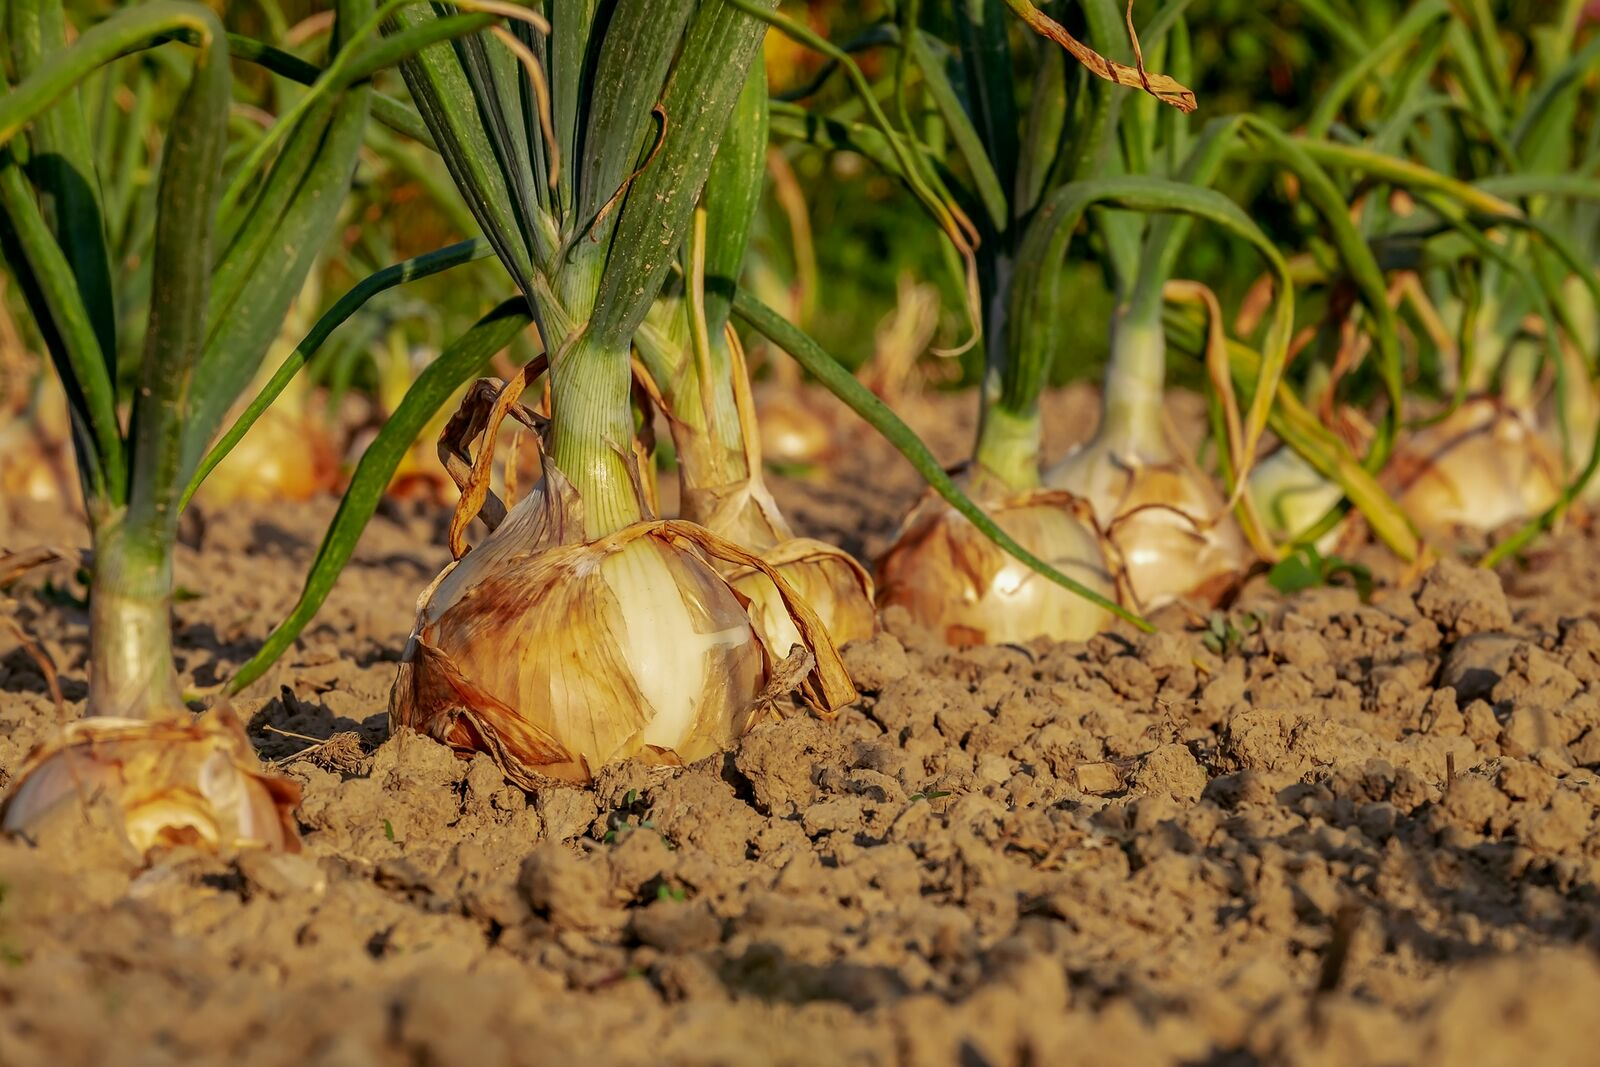 Planting, growing & harvesting onions - a guide